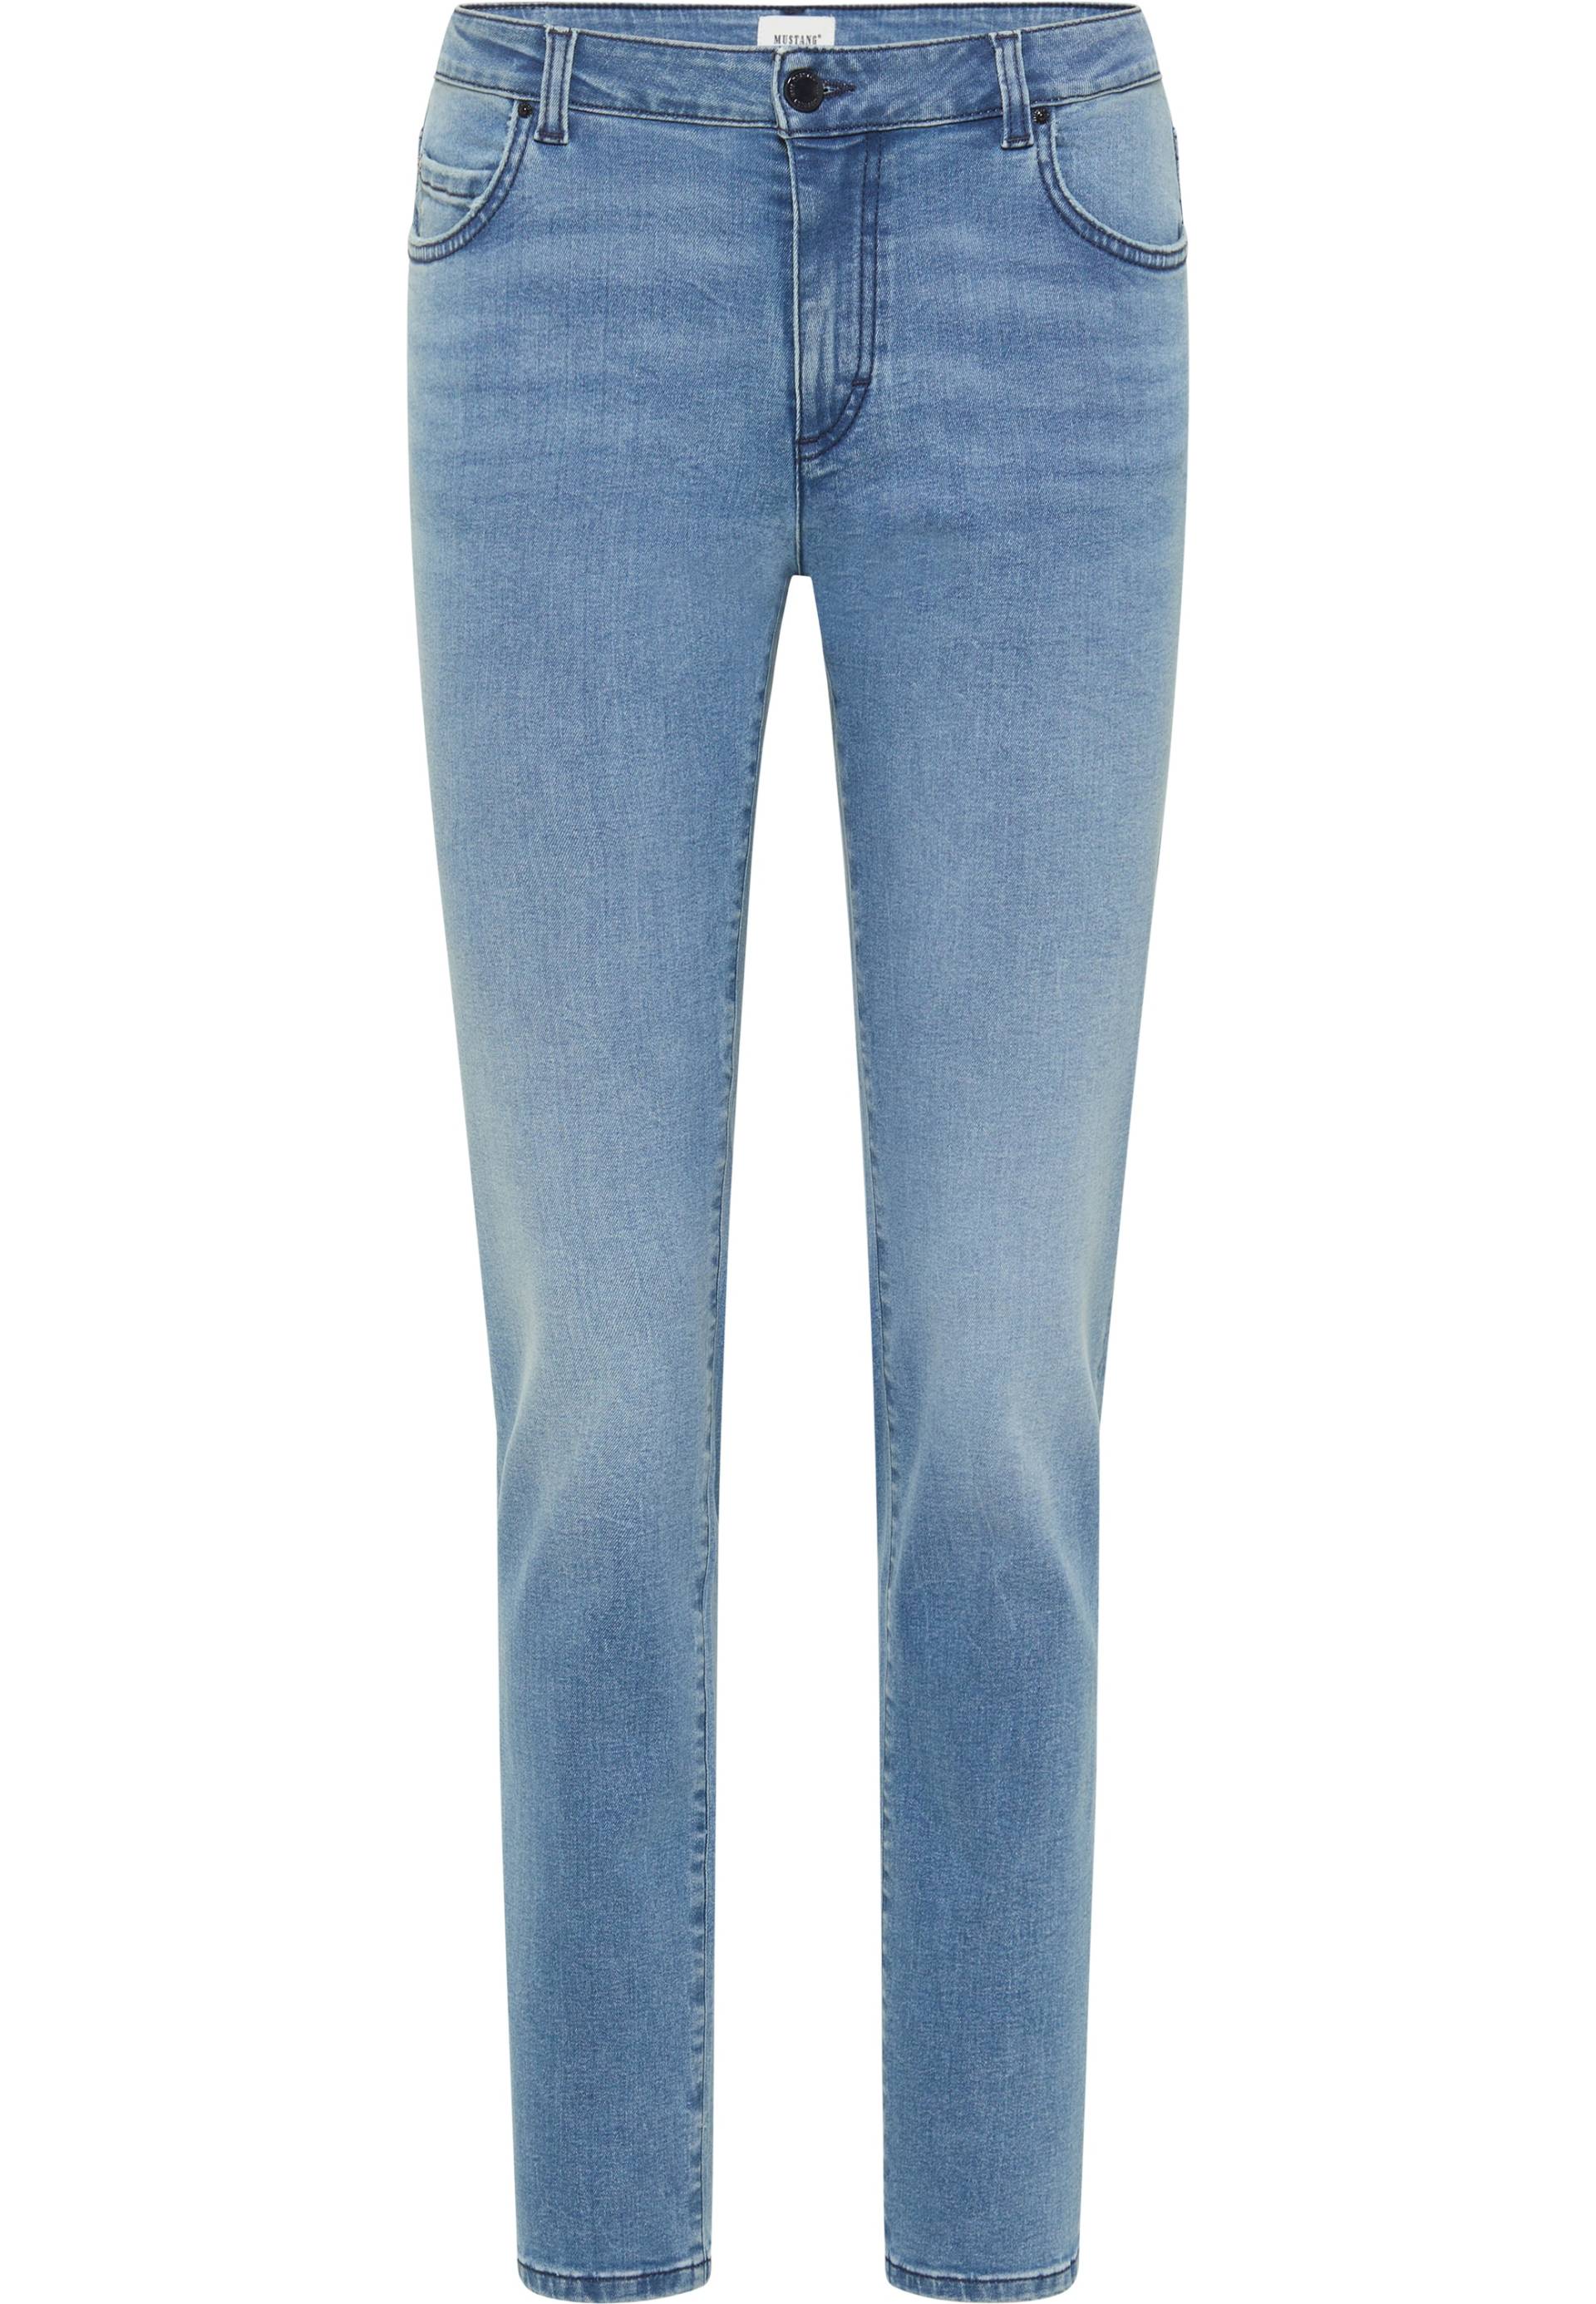 MUSTANG Slim-fit-Jeans »Style Crosby Relaxed Slim« von Mustang